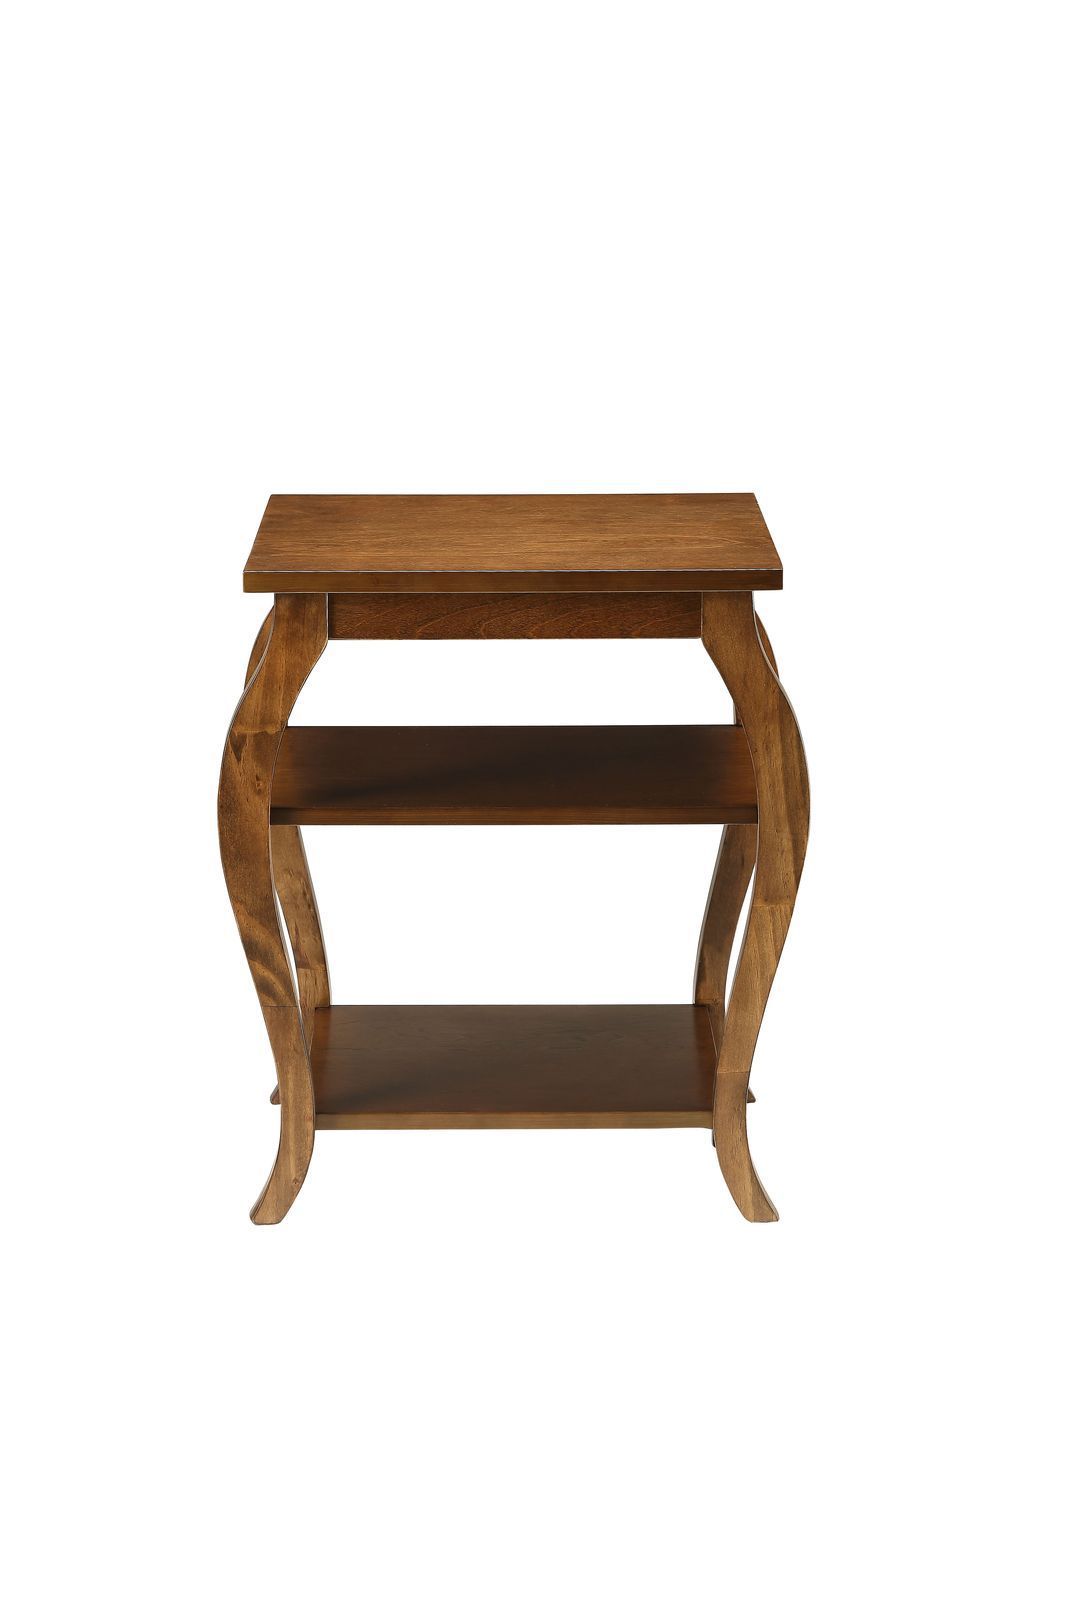 ACME Becci End Table in Walnut